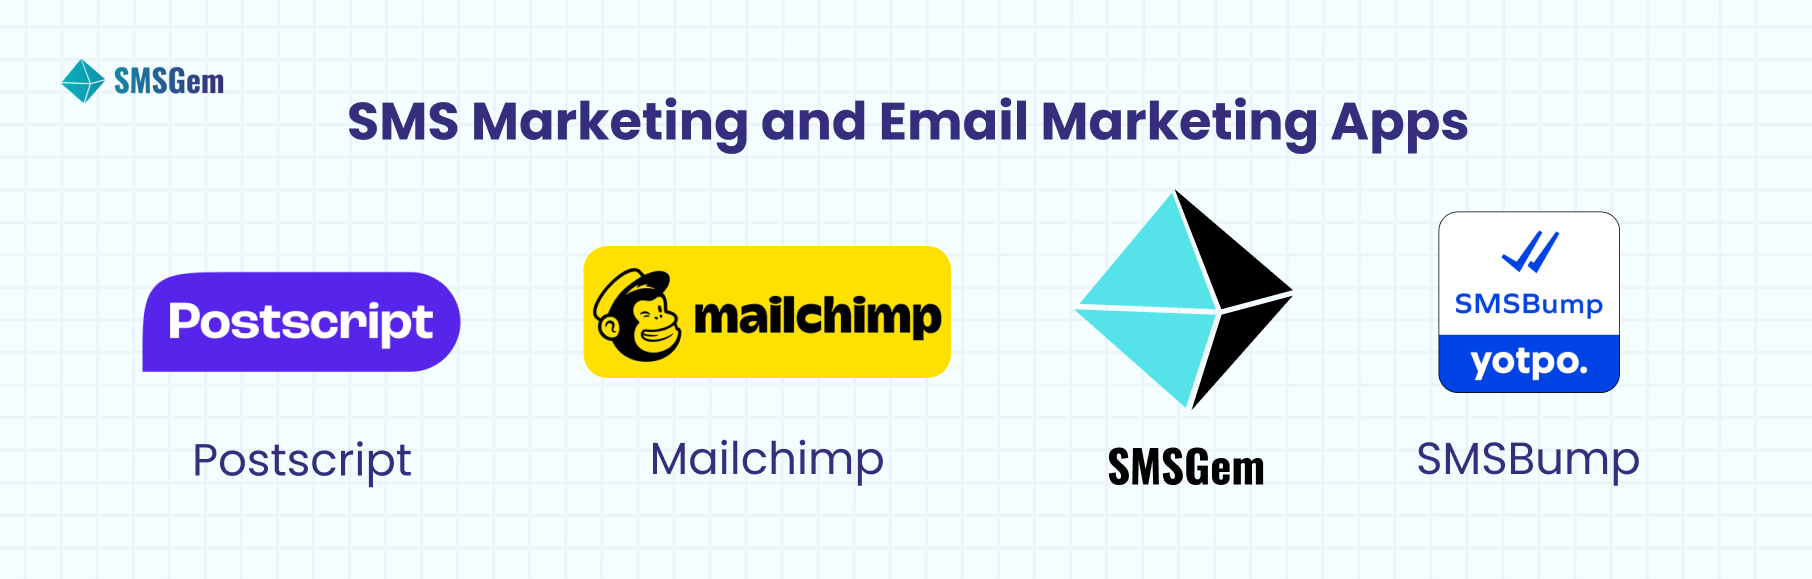 SMS Marketing and Email Marketing Applications